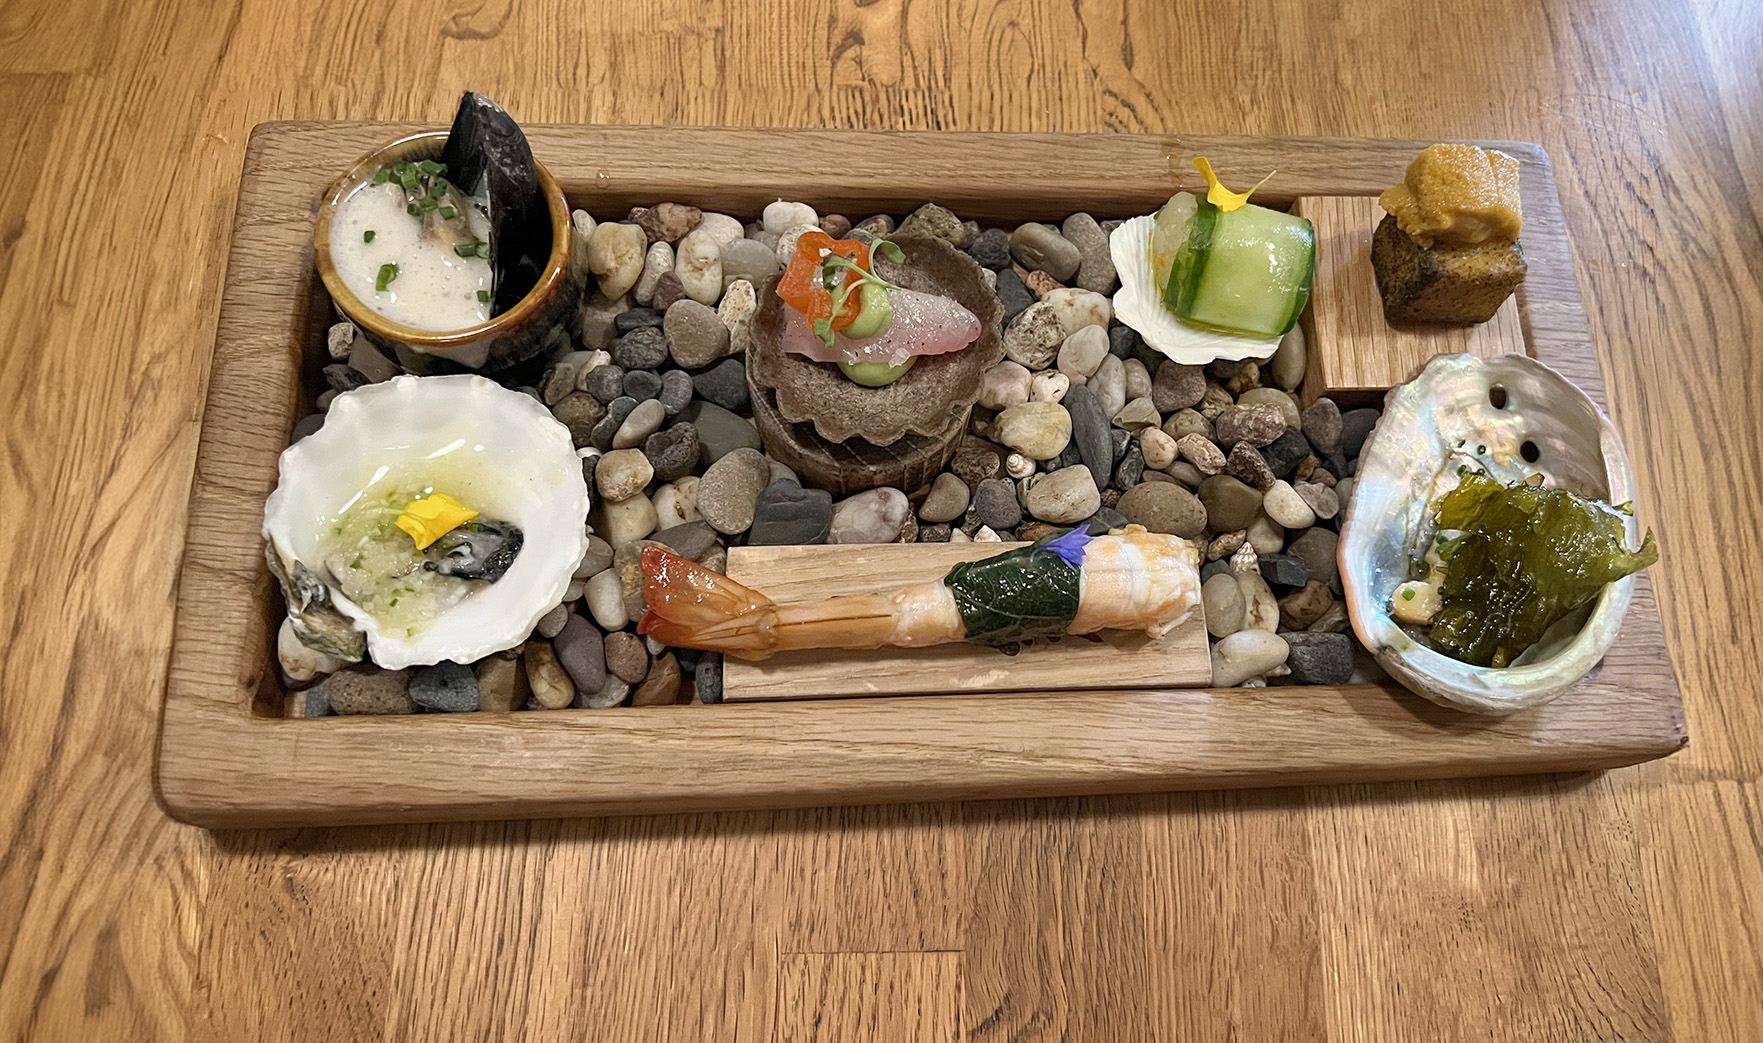 Crowded Beach paired with Tamano Hikari, Bizen Omachi, Junmai Daiginjo at Kali Restaurant in Los Angeles (Photo by Julie Nguyen)